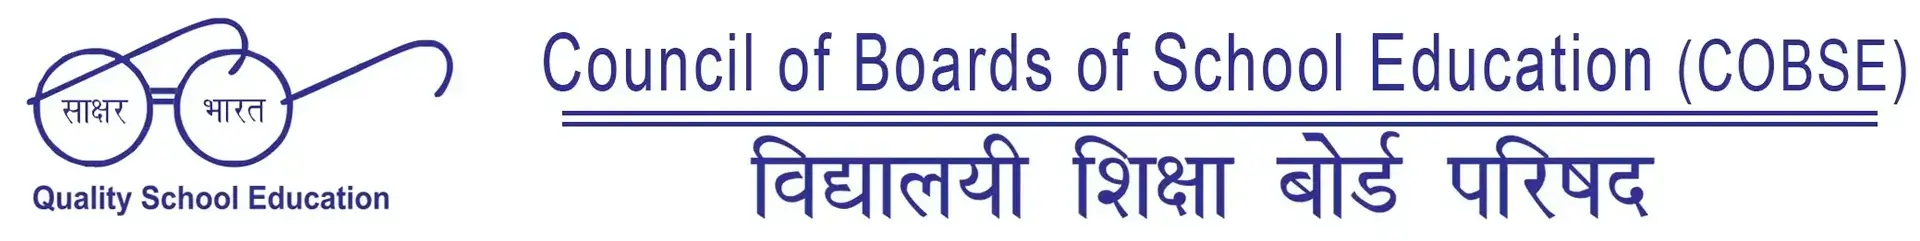 Council of Boards of School Education in India (COBSE)